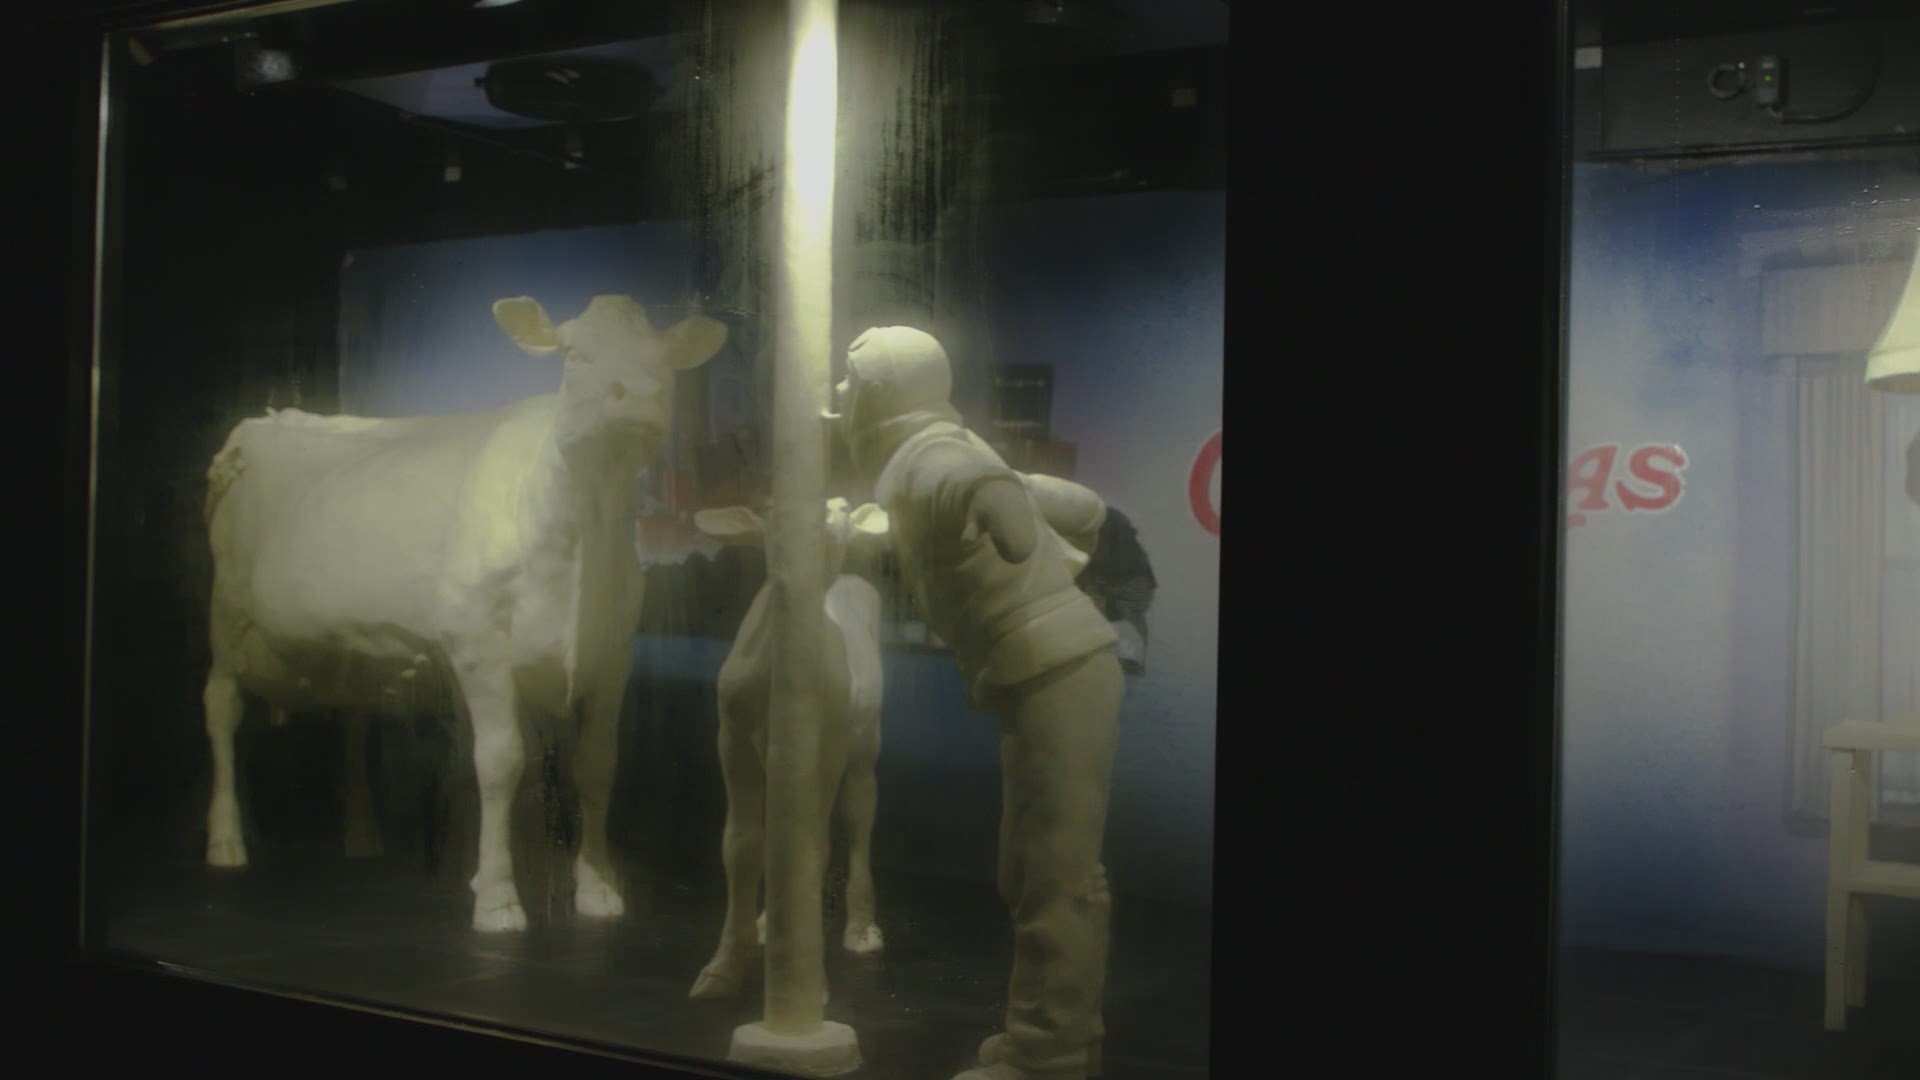 Video from the American Dairy Association.